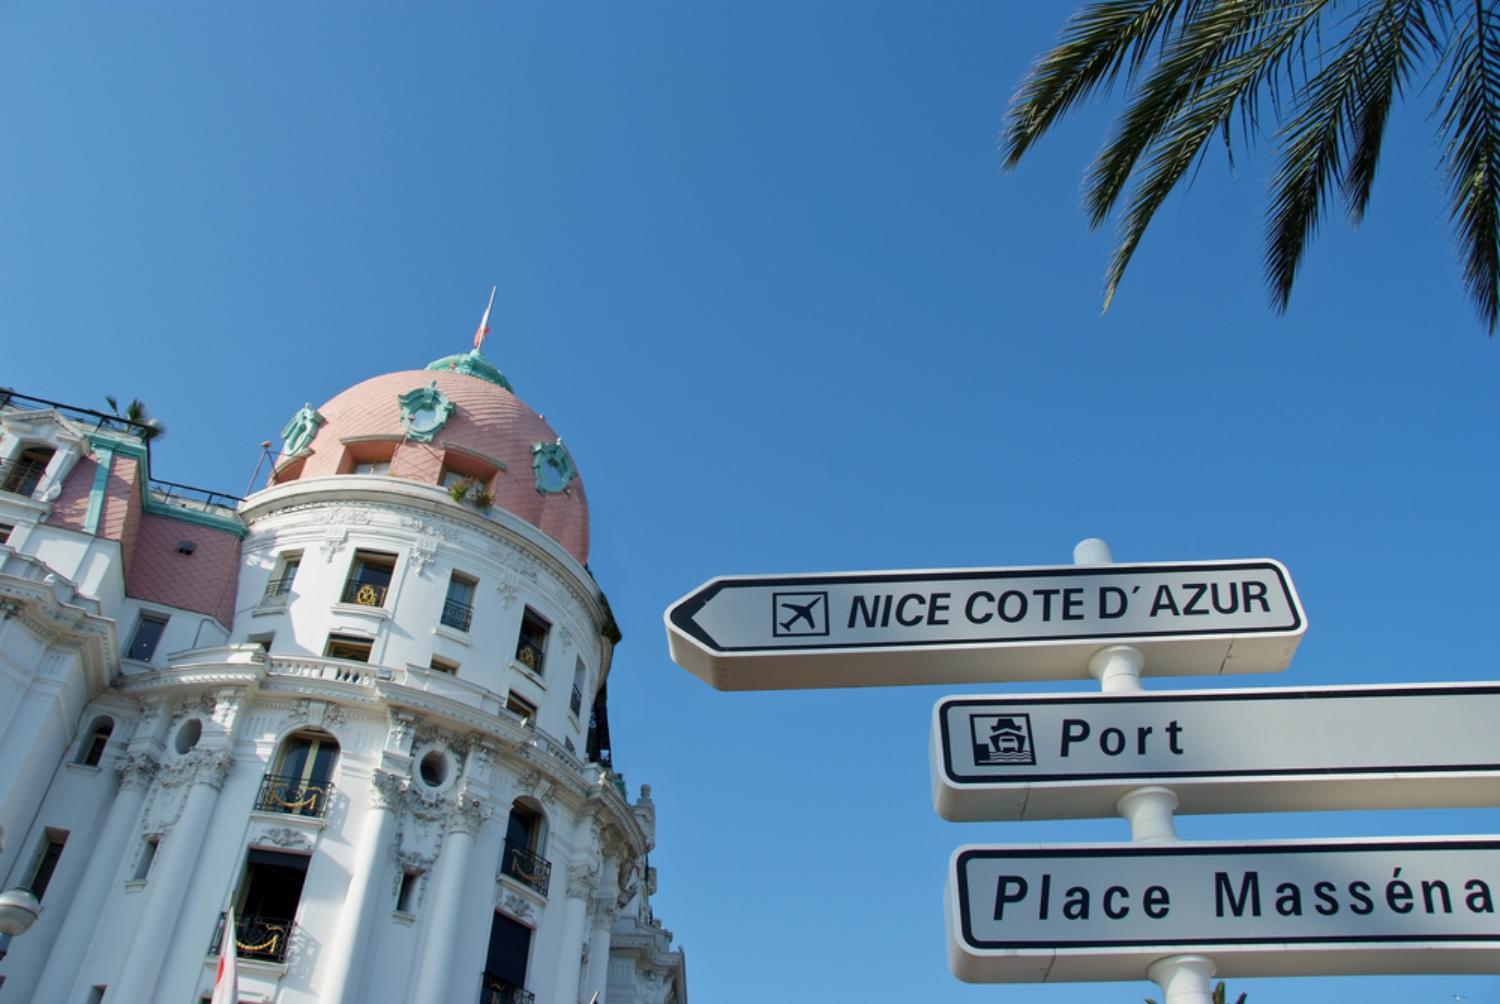 Daytime transfer by private vehicle to Nice and Nice airport from Monaco.